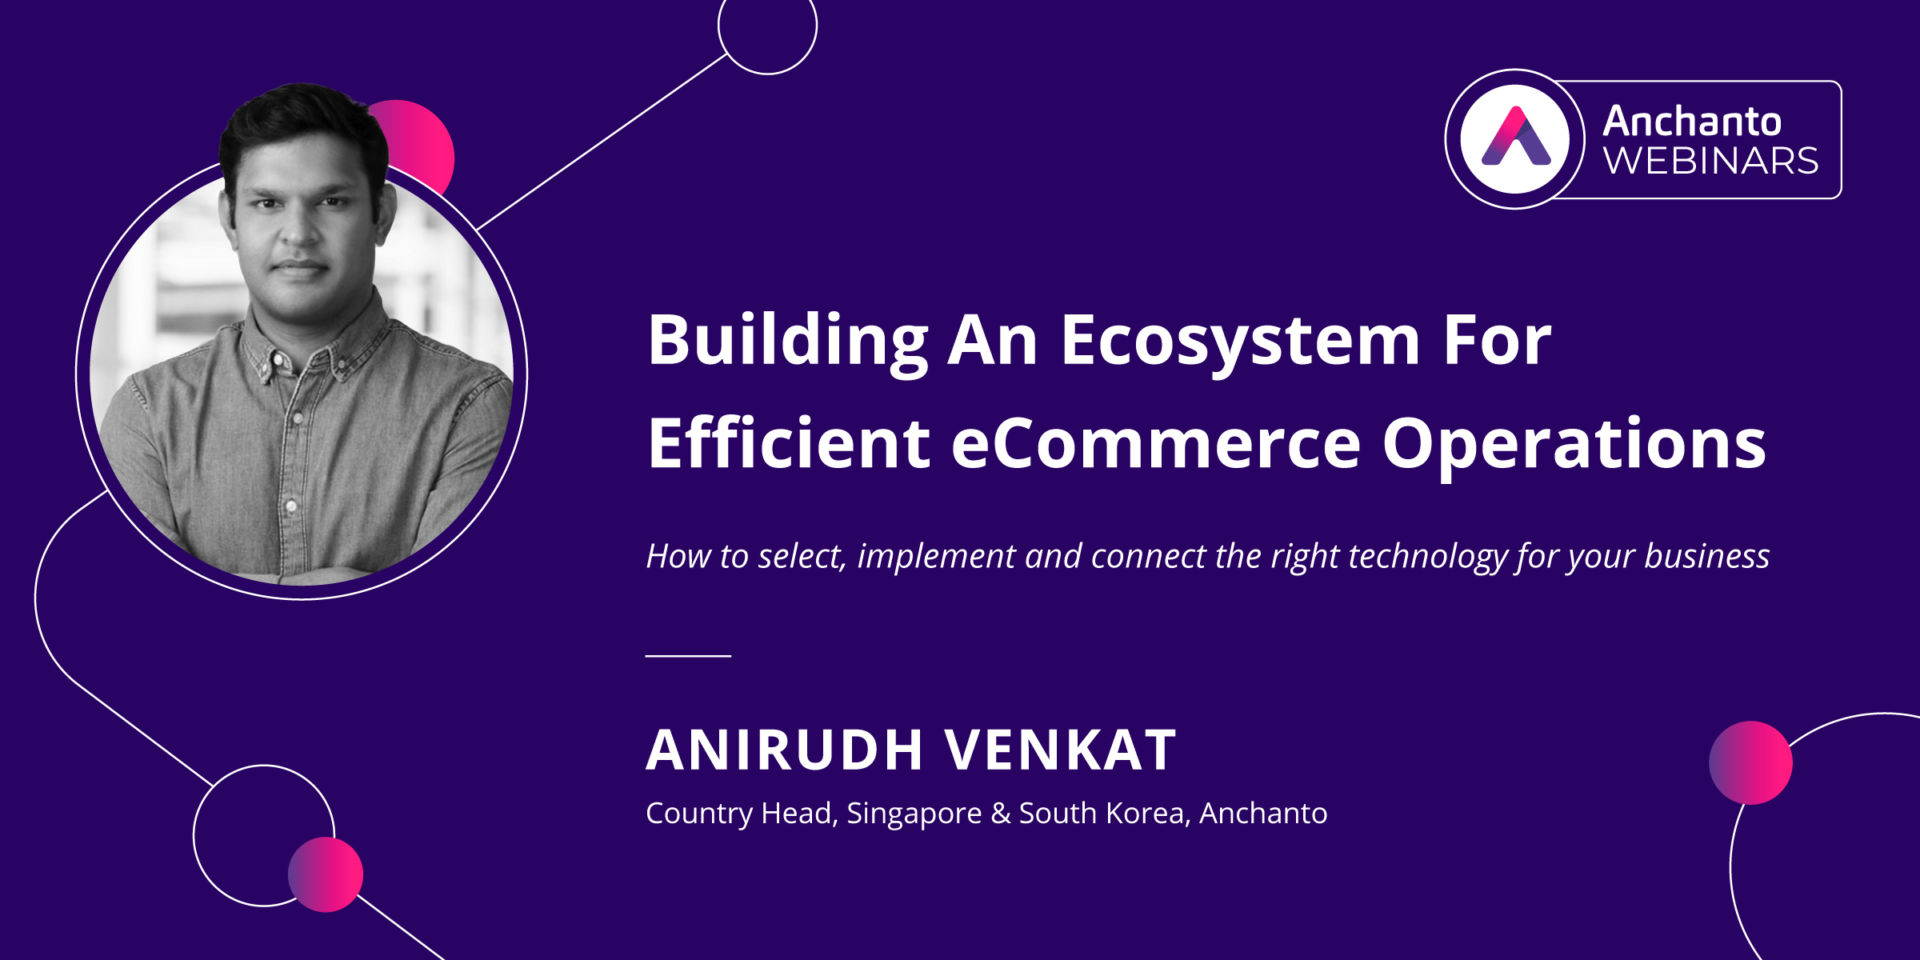 Building An Ecosystem For Efficient Ecommerce Operations